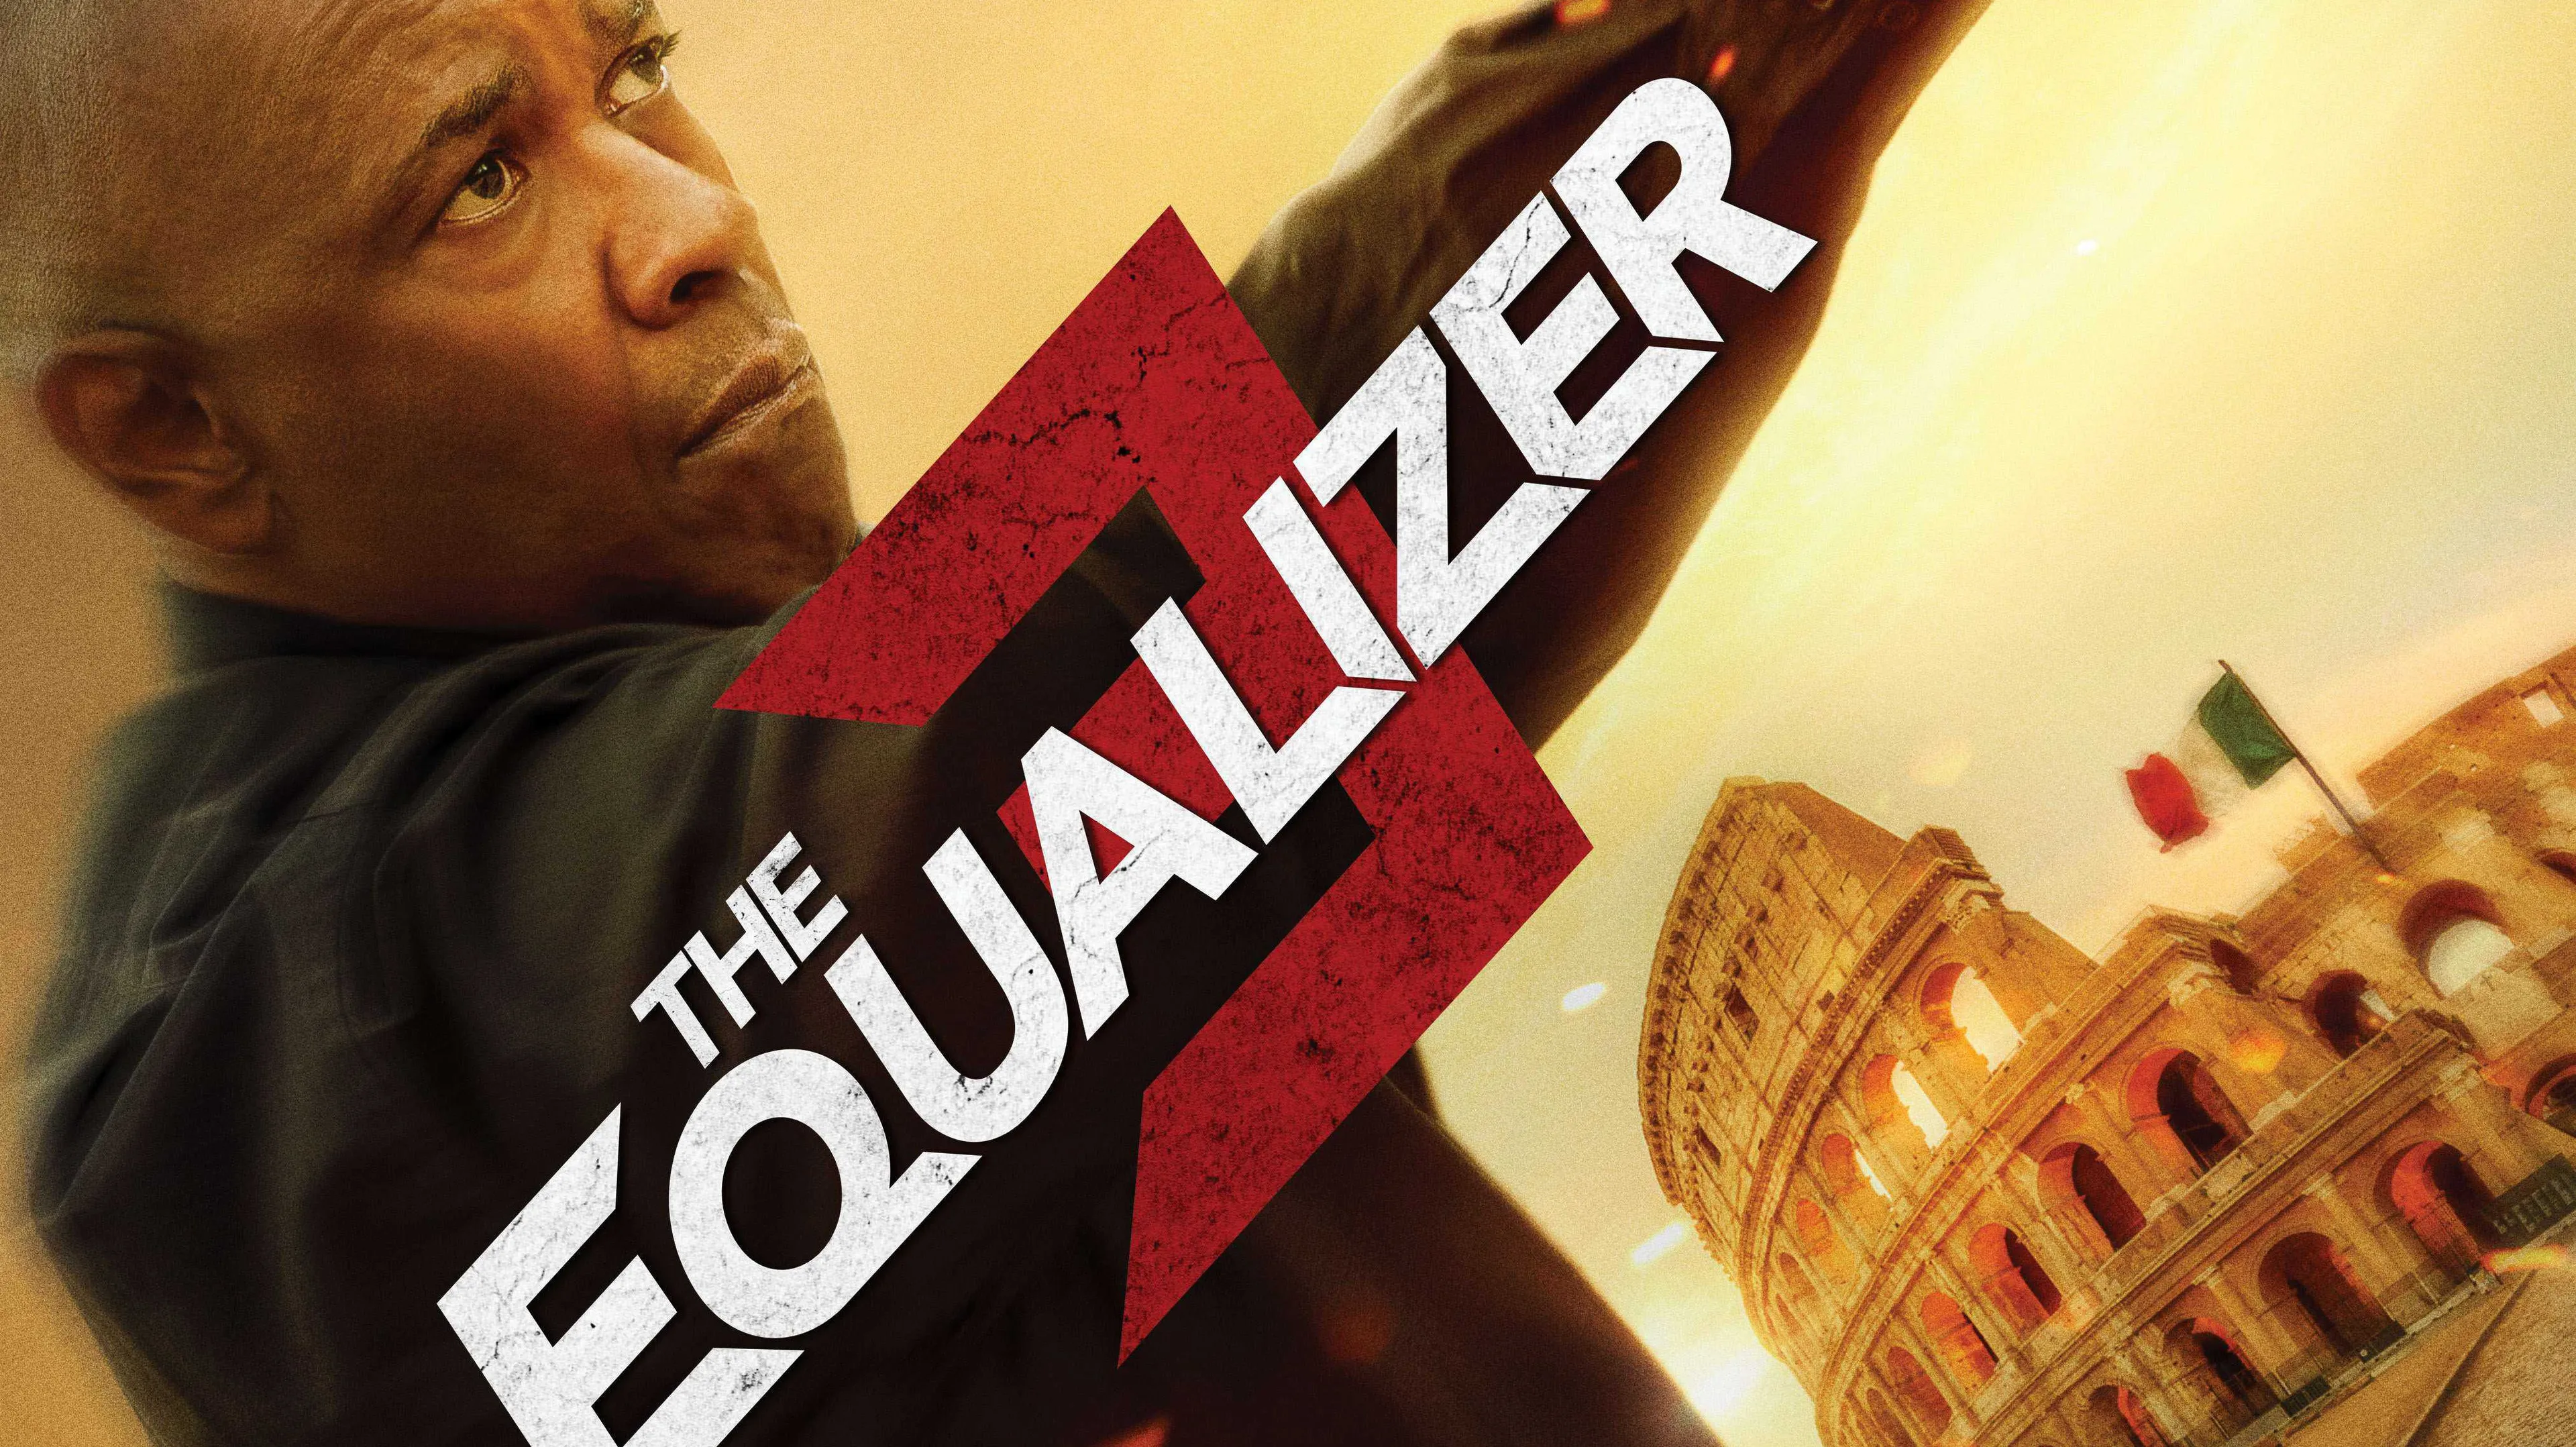 the equalizer 3 filmposterf1692974992